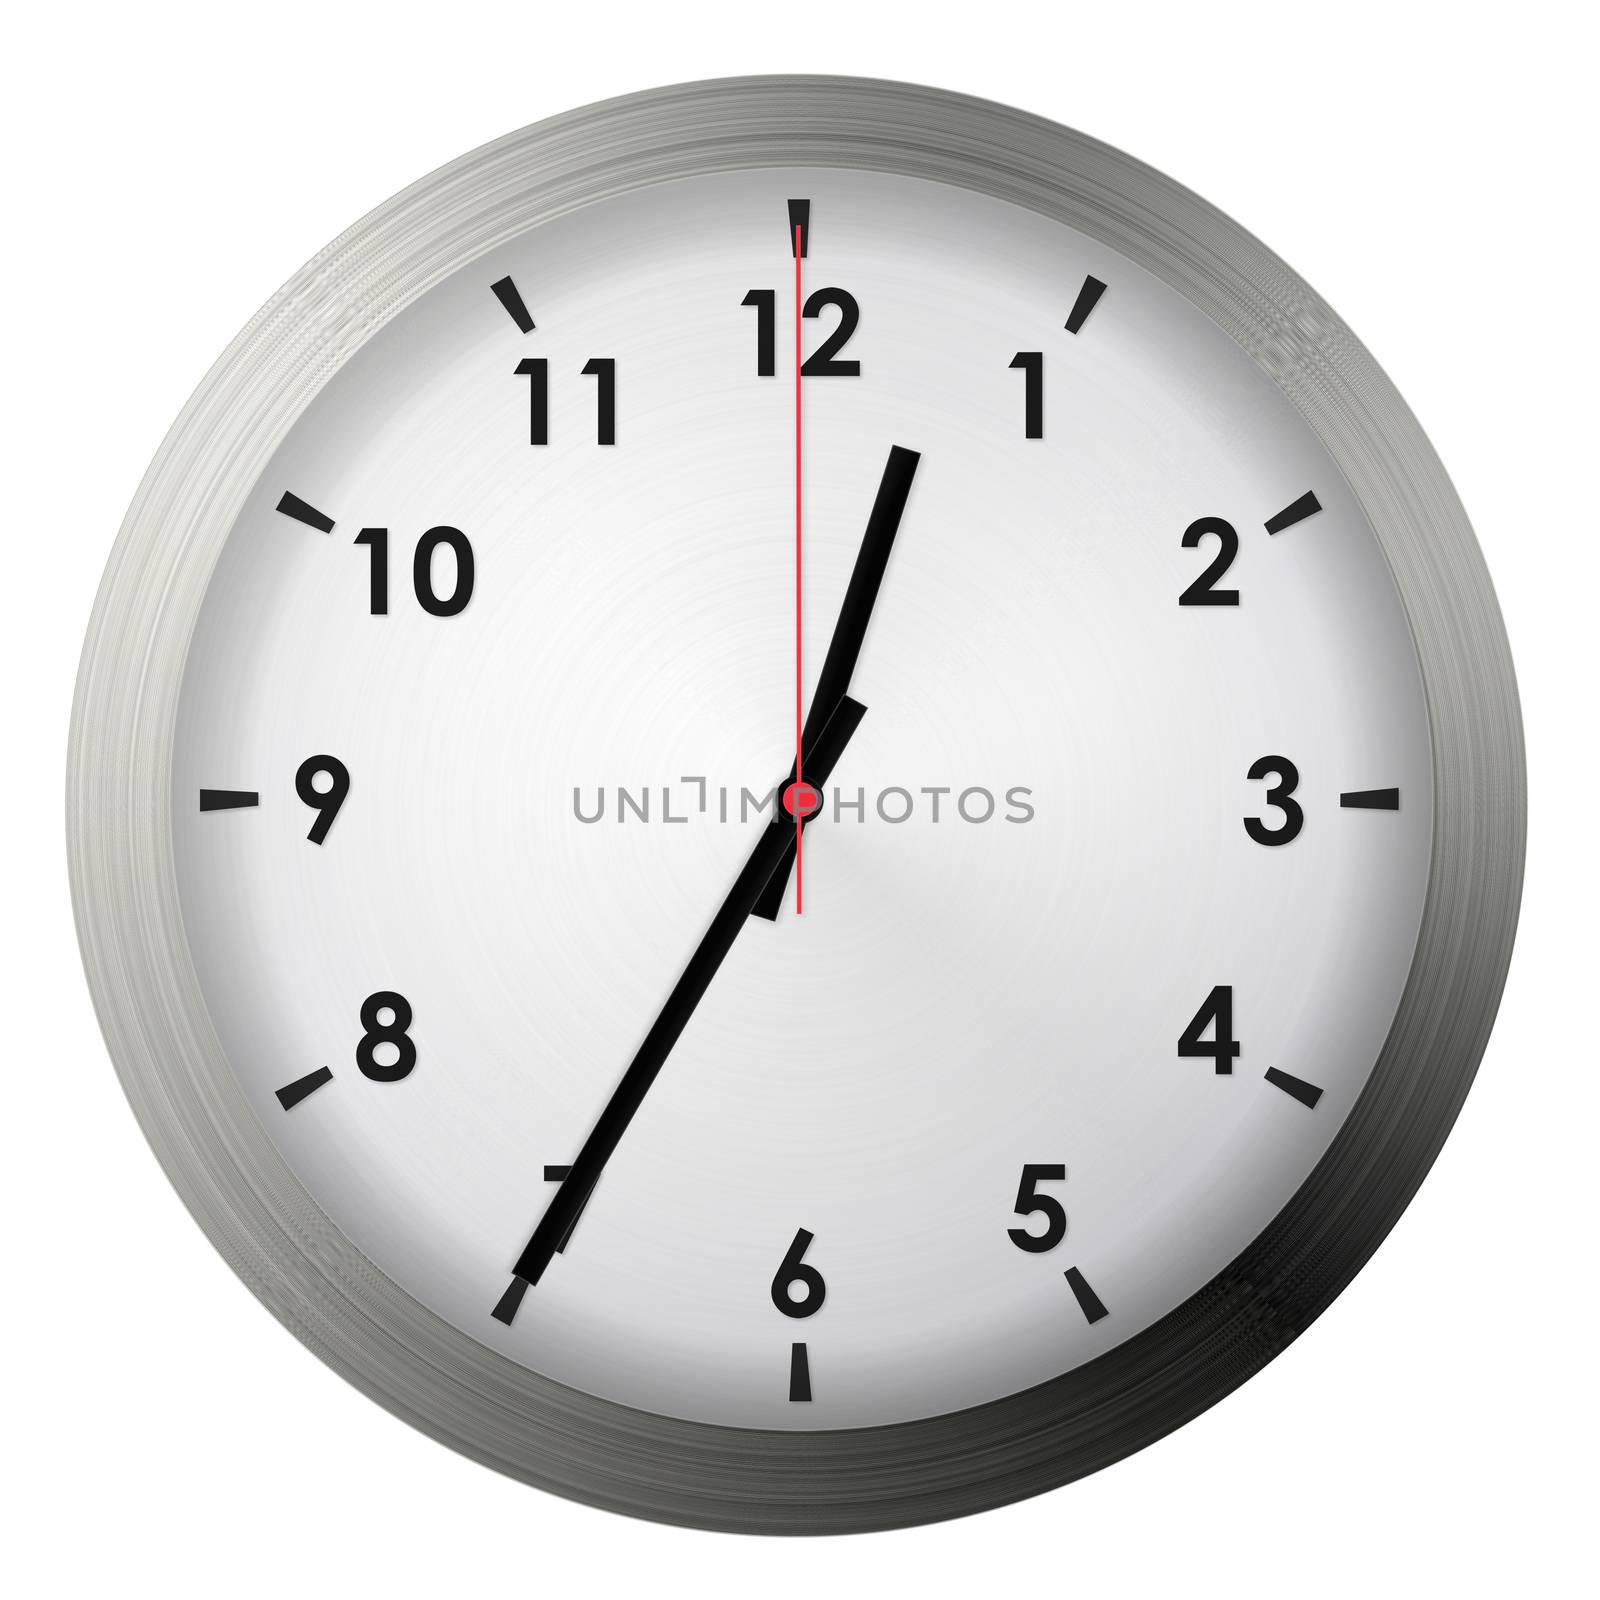 Analog metal wall clock isolated on white background.